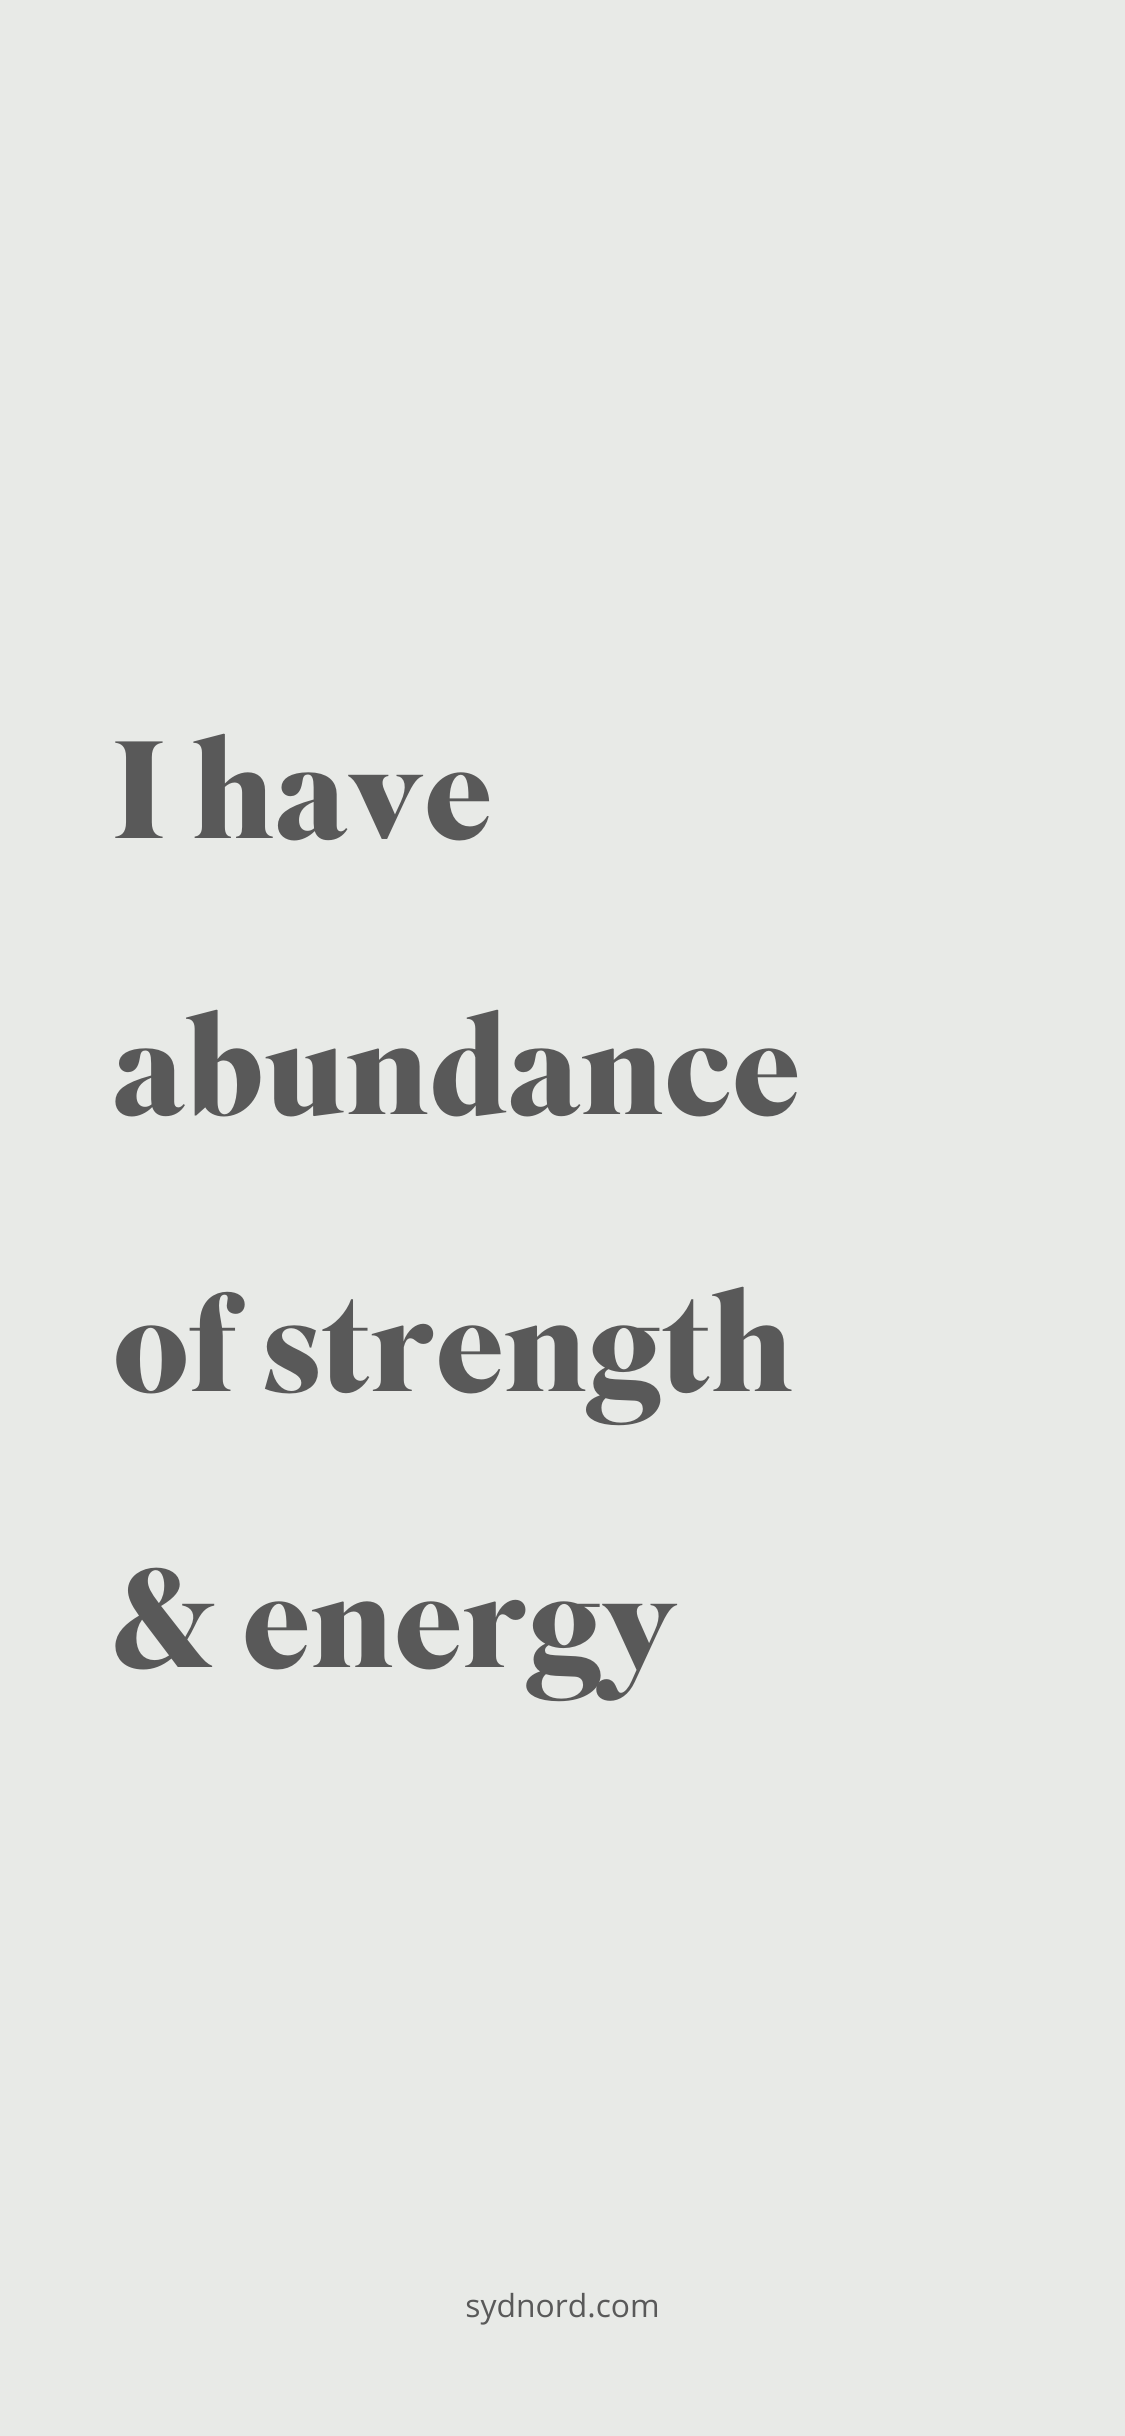 Good positive quotes: I have abundance of strength & energy